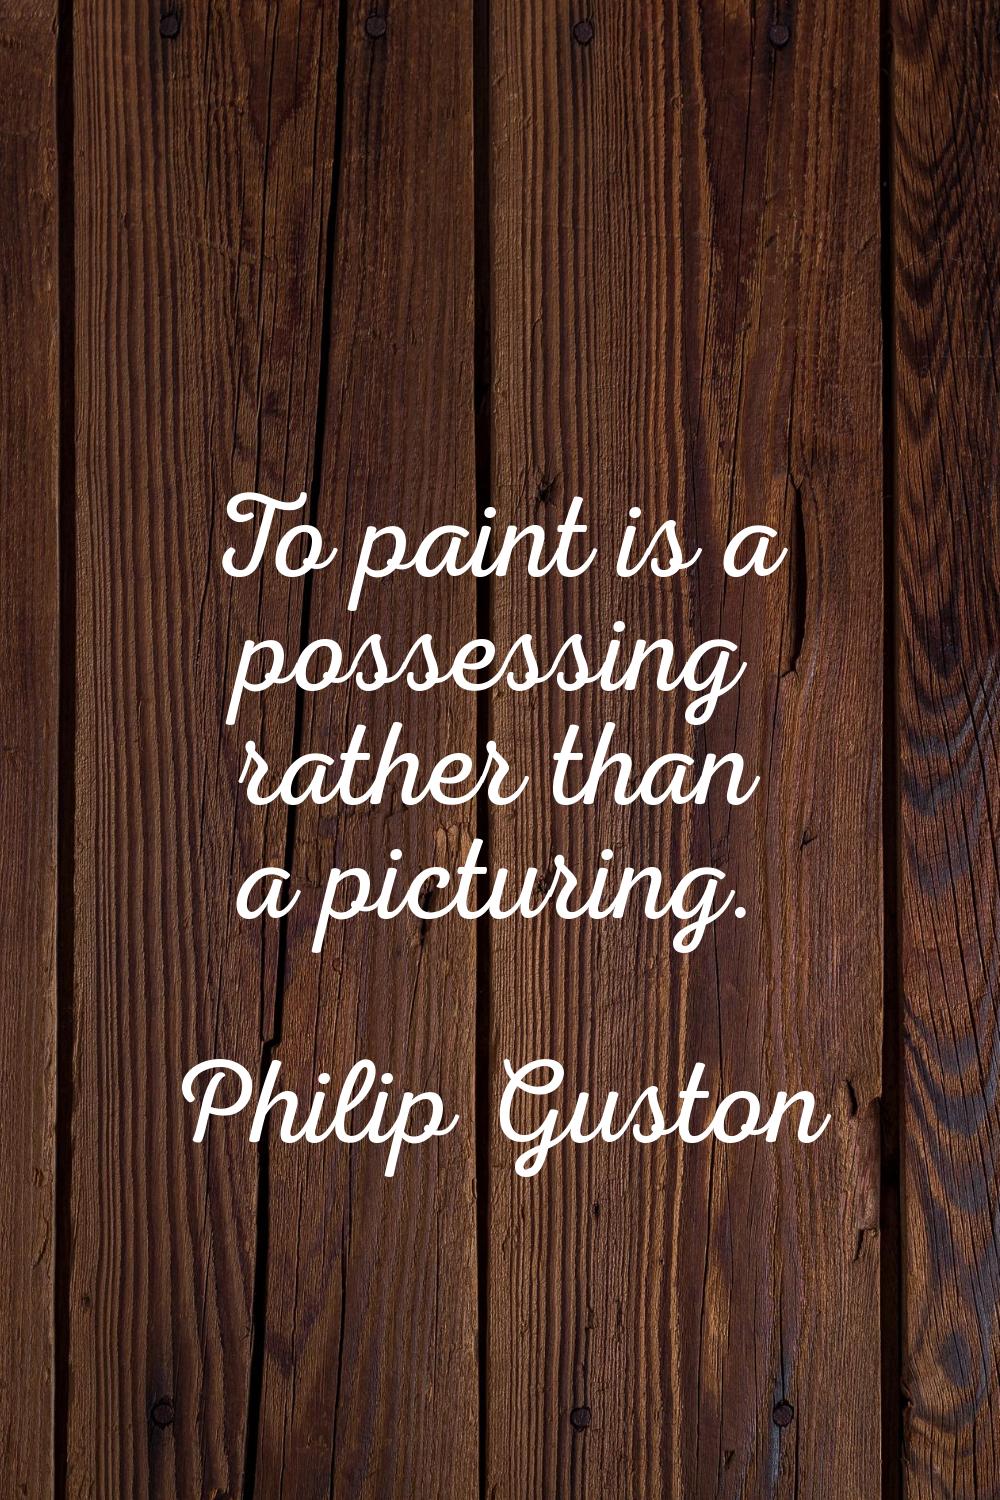 To paint is a possessing rather than a picturing.